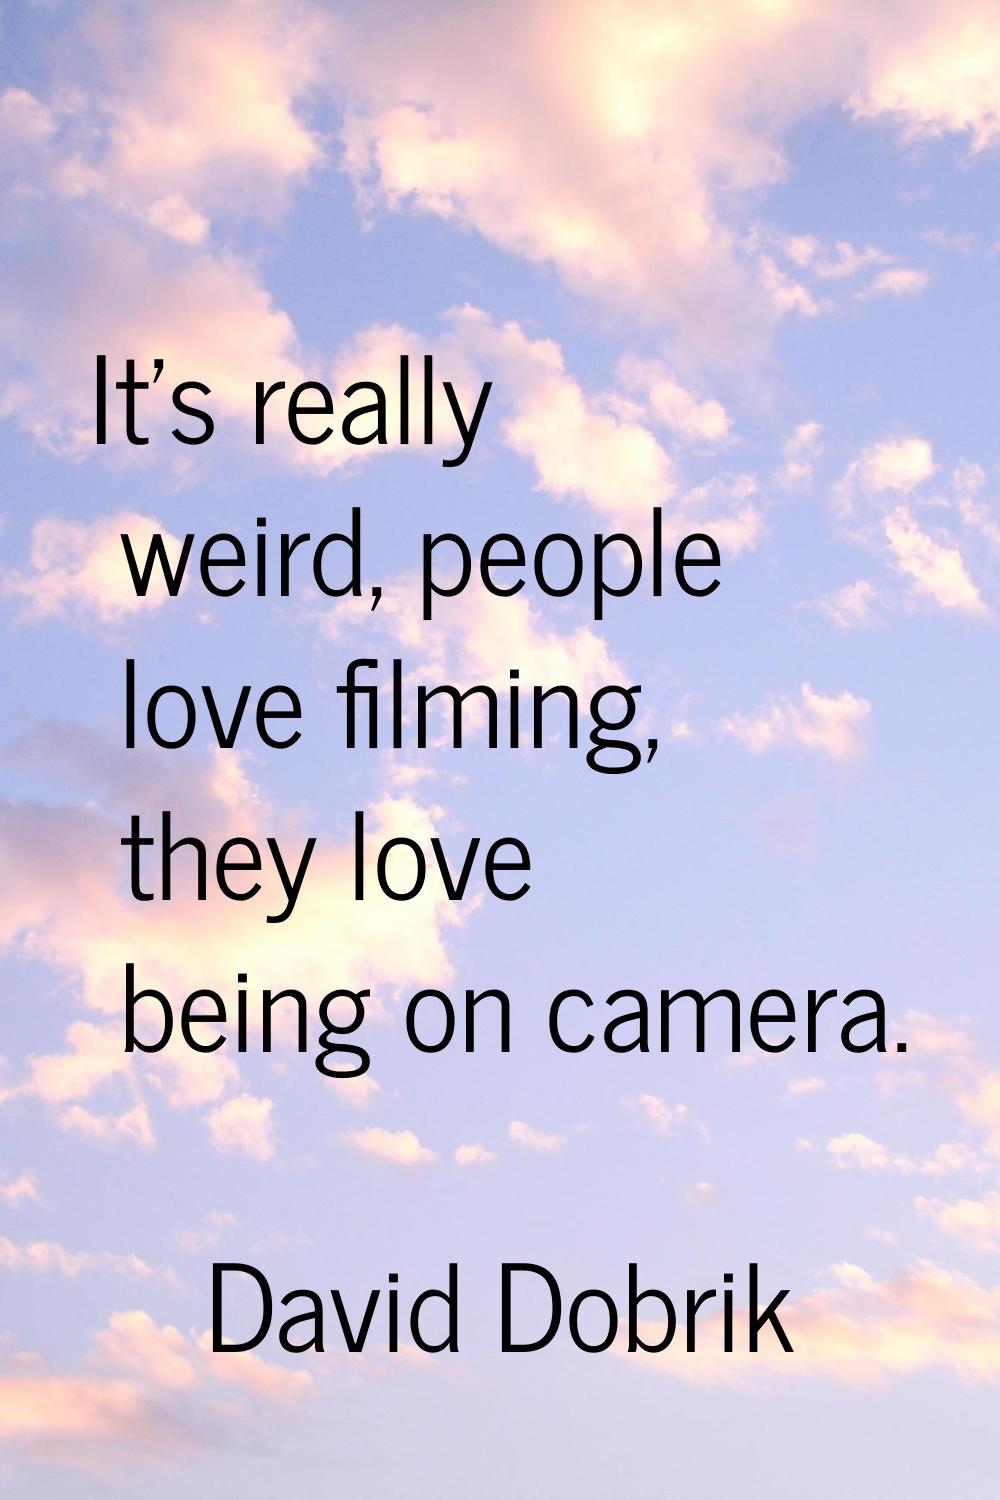 It's really weird, people love filming, they love being on camera.